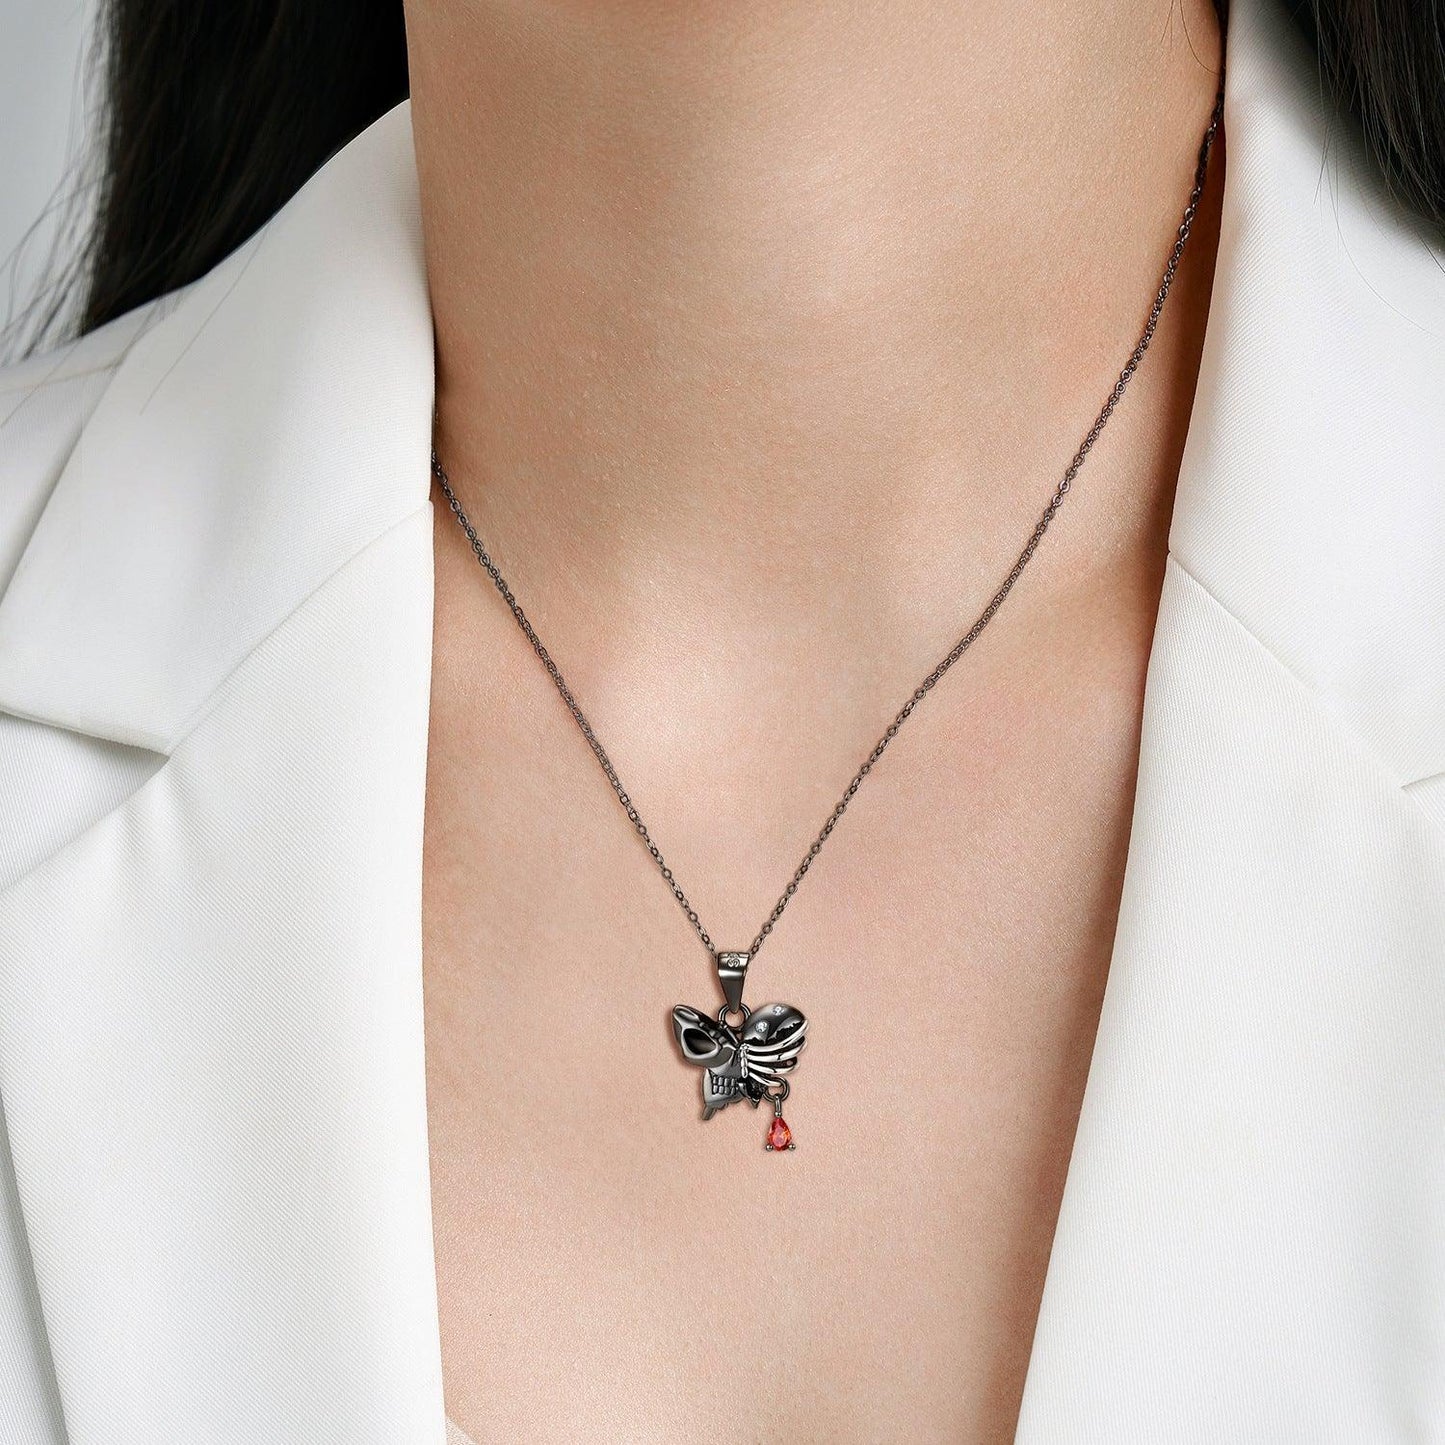 Butterfly Skull Skeleton Small Punk Dark Wind Necklace in 2023 | Butterfly Skull Skeleton Small Punk Dark Wind Necklace - undefined | Butterfly Skull Skeleton Necklace, Halloween Necklace, Punk Dark Wind Necklace, S925 Sterling Silver Necklace | From Hunny Life | hunnylife.com